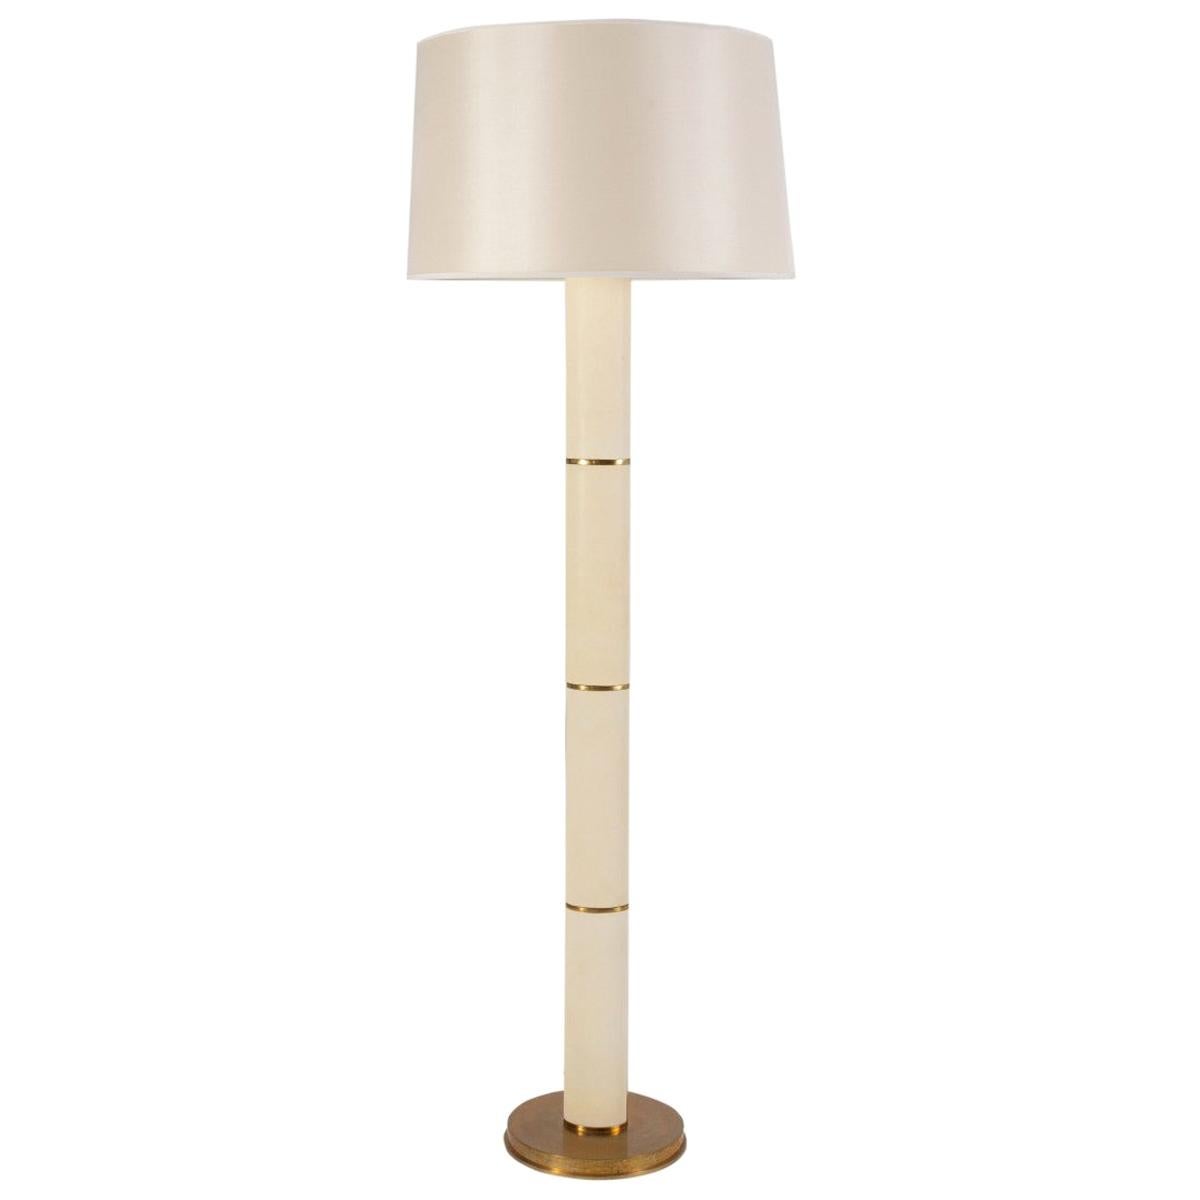 Ralph Lauren Upper Fifth Floor Lamp in Parchment Leather and Natural Brass with